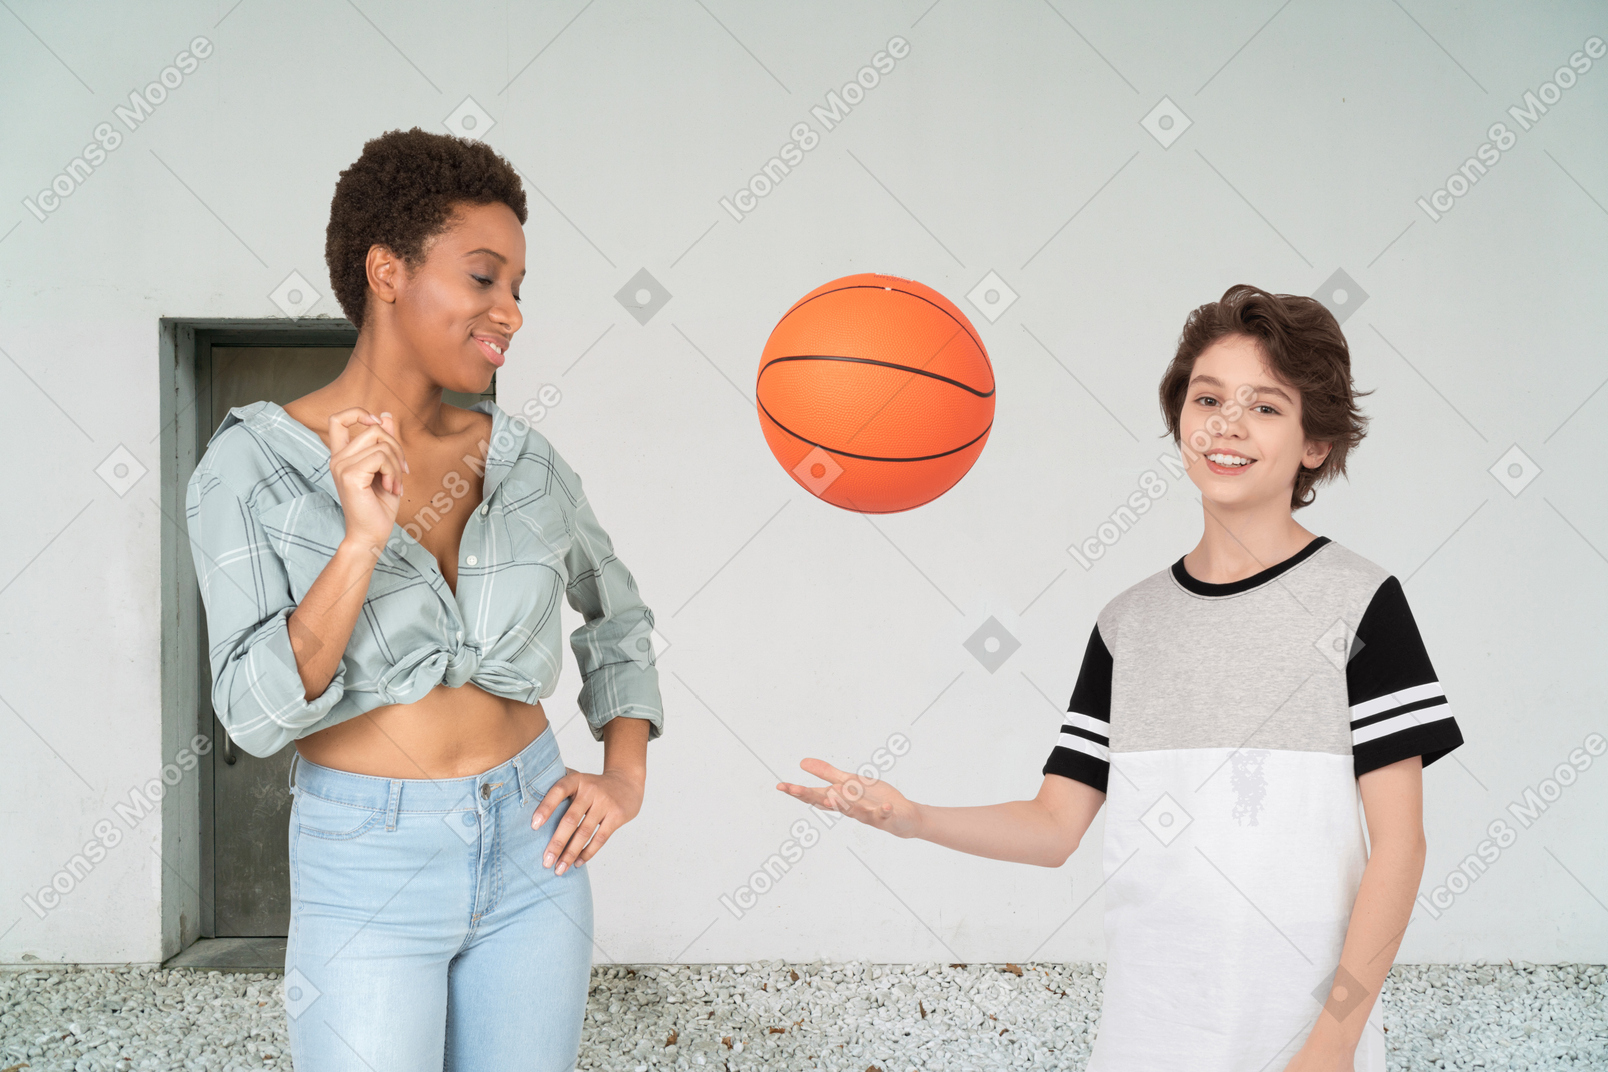 Kiddo wants to try his powers against old basket champ